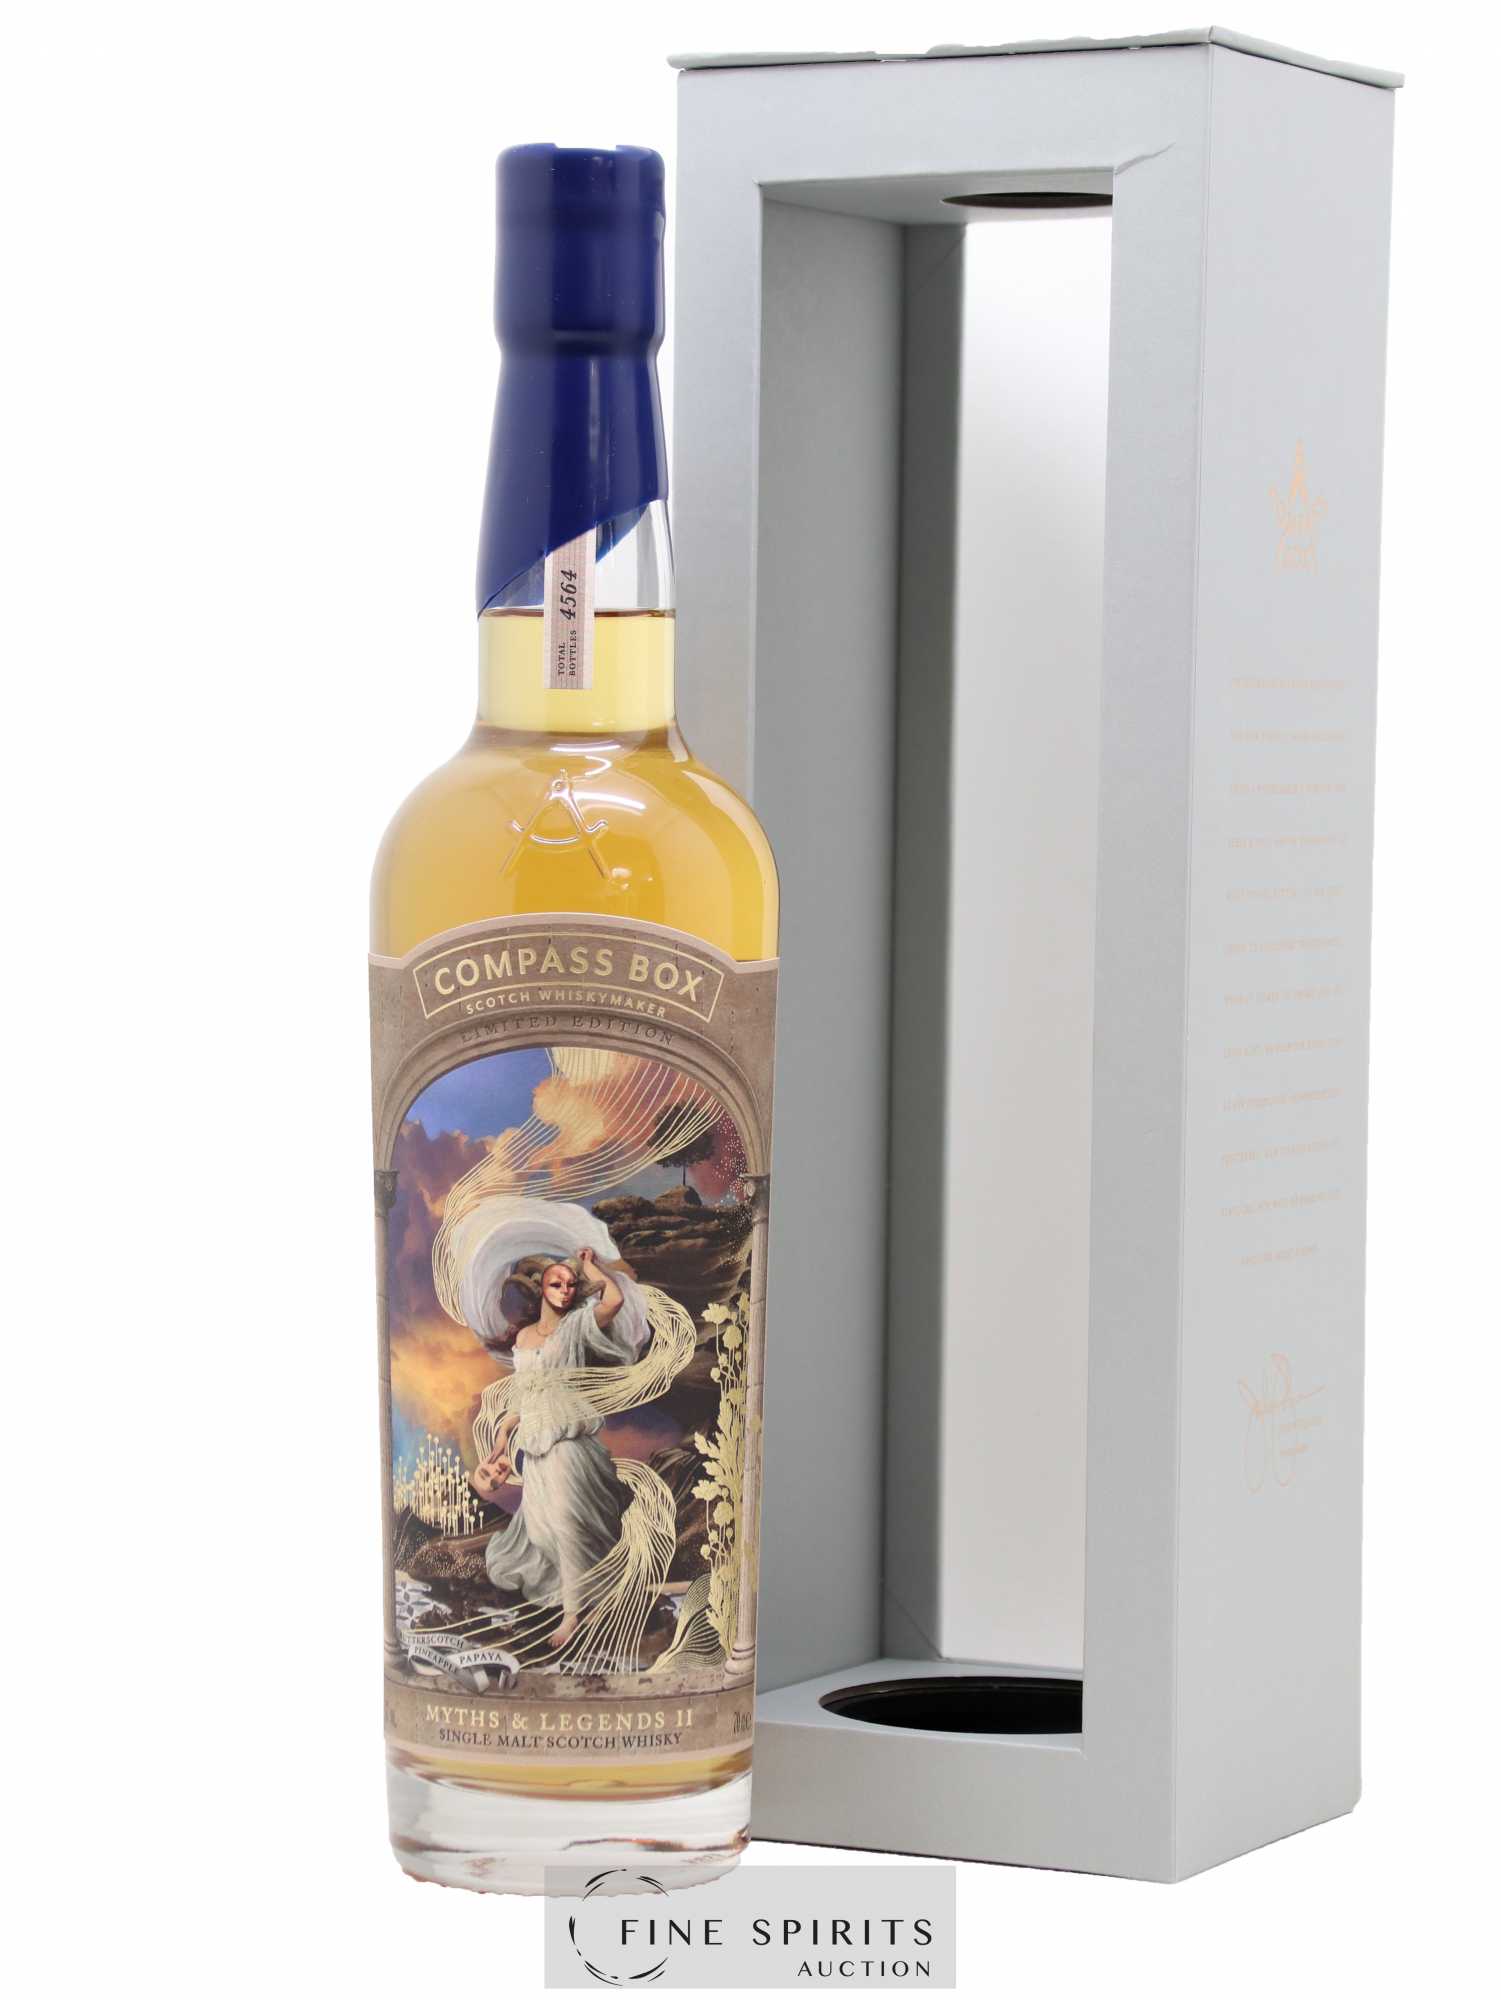 Myths & Legends II Compass Box One of 4564 - bottled 2019 Limited Edition 